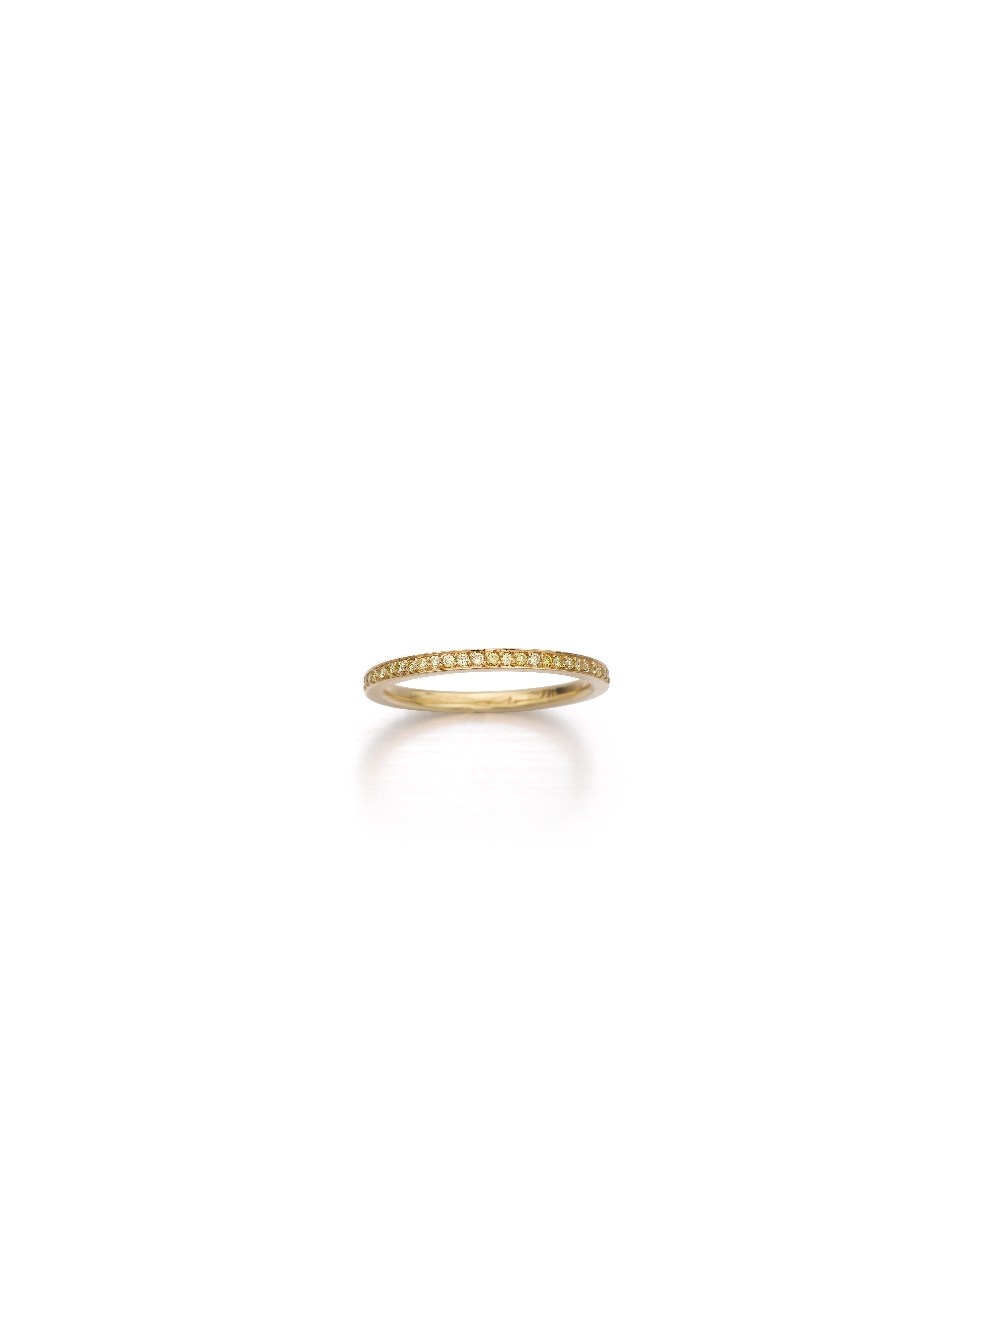 A Diamond Eternity Band Ring For Men Set with small circular-cut yellow diamonds, mounted in 18k